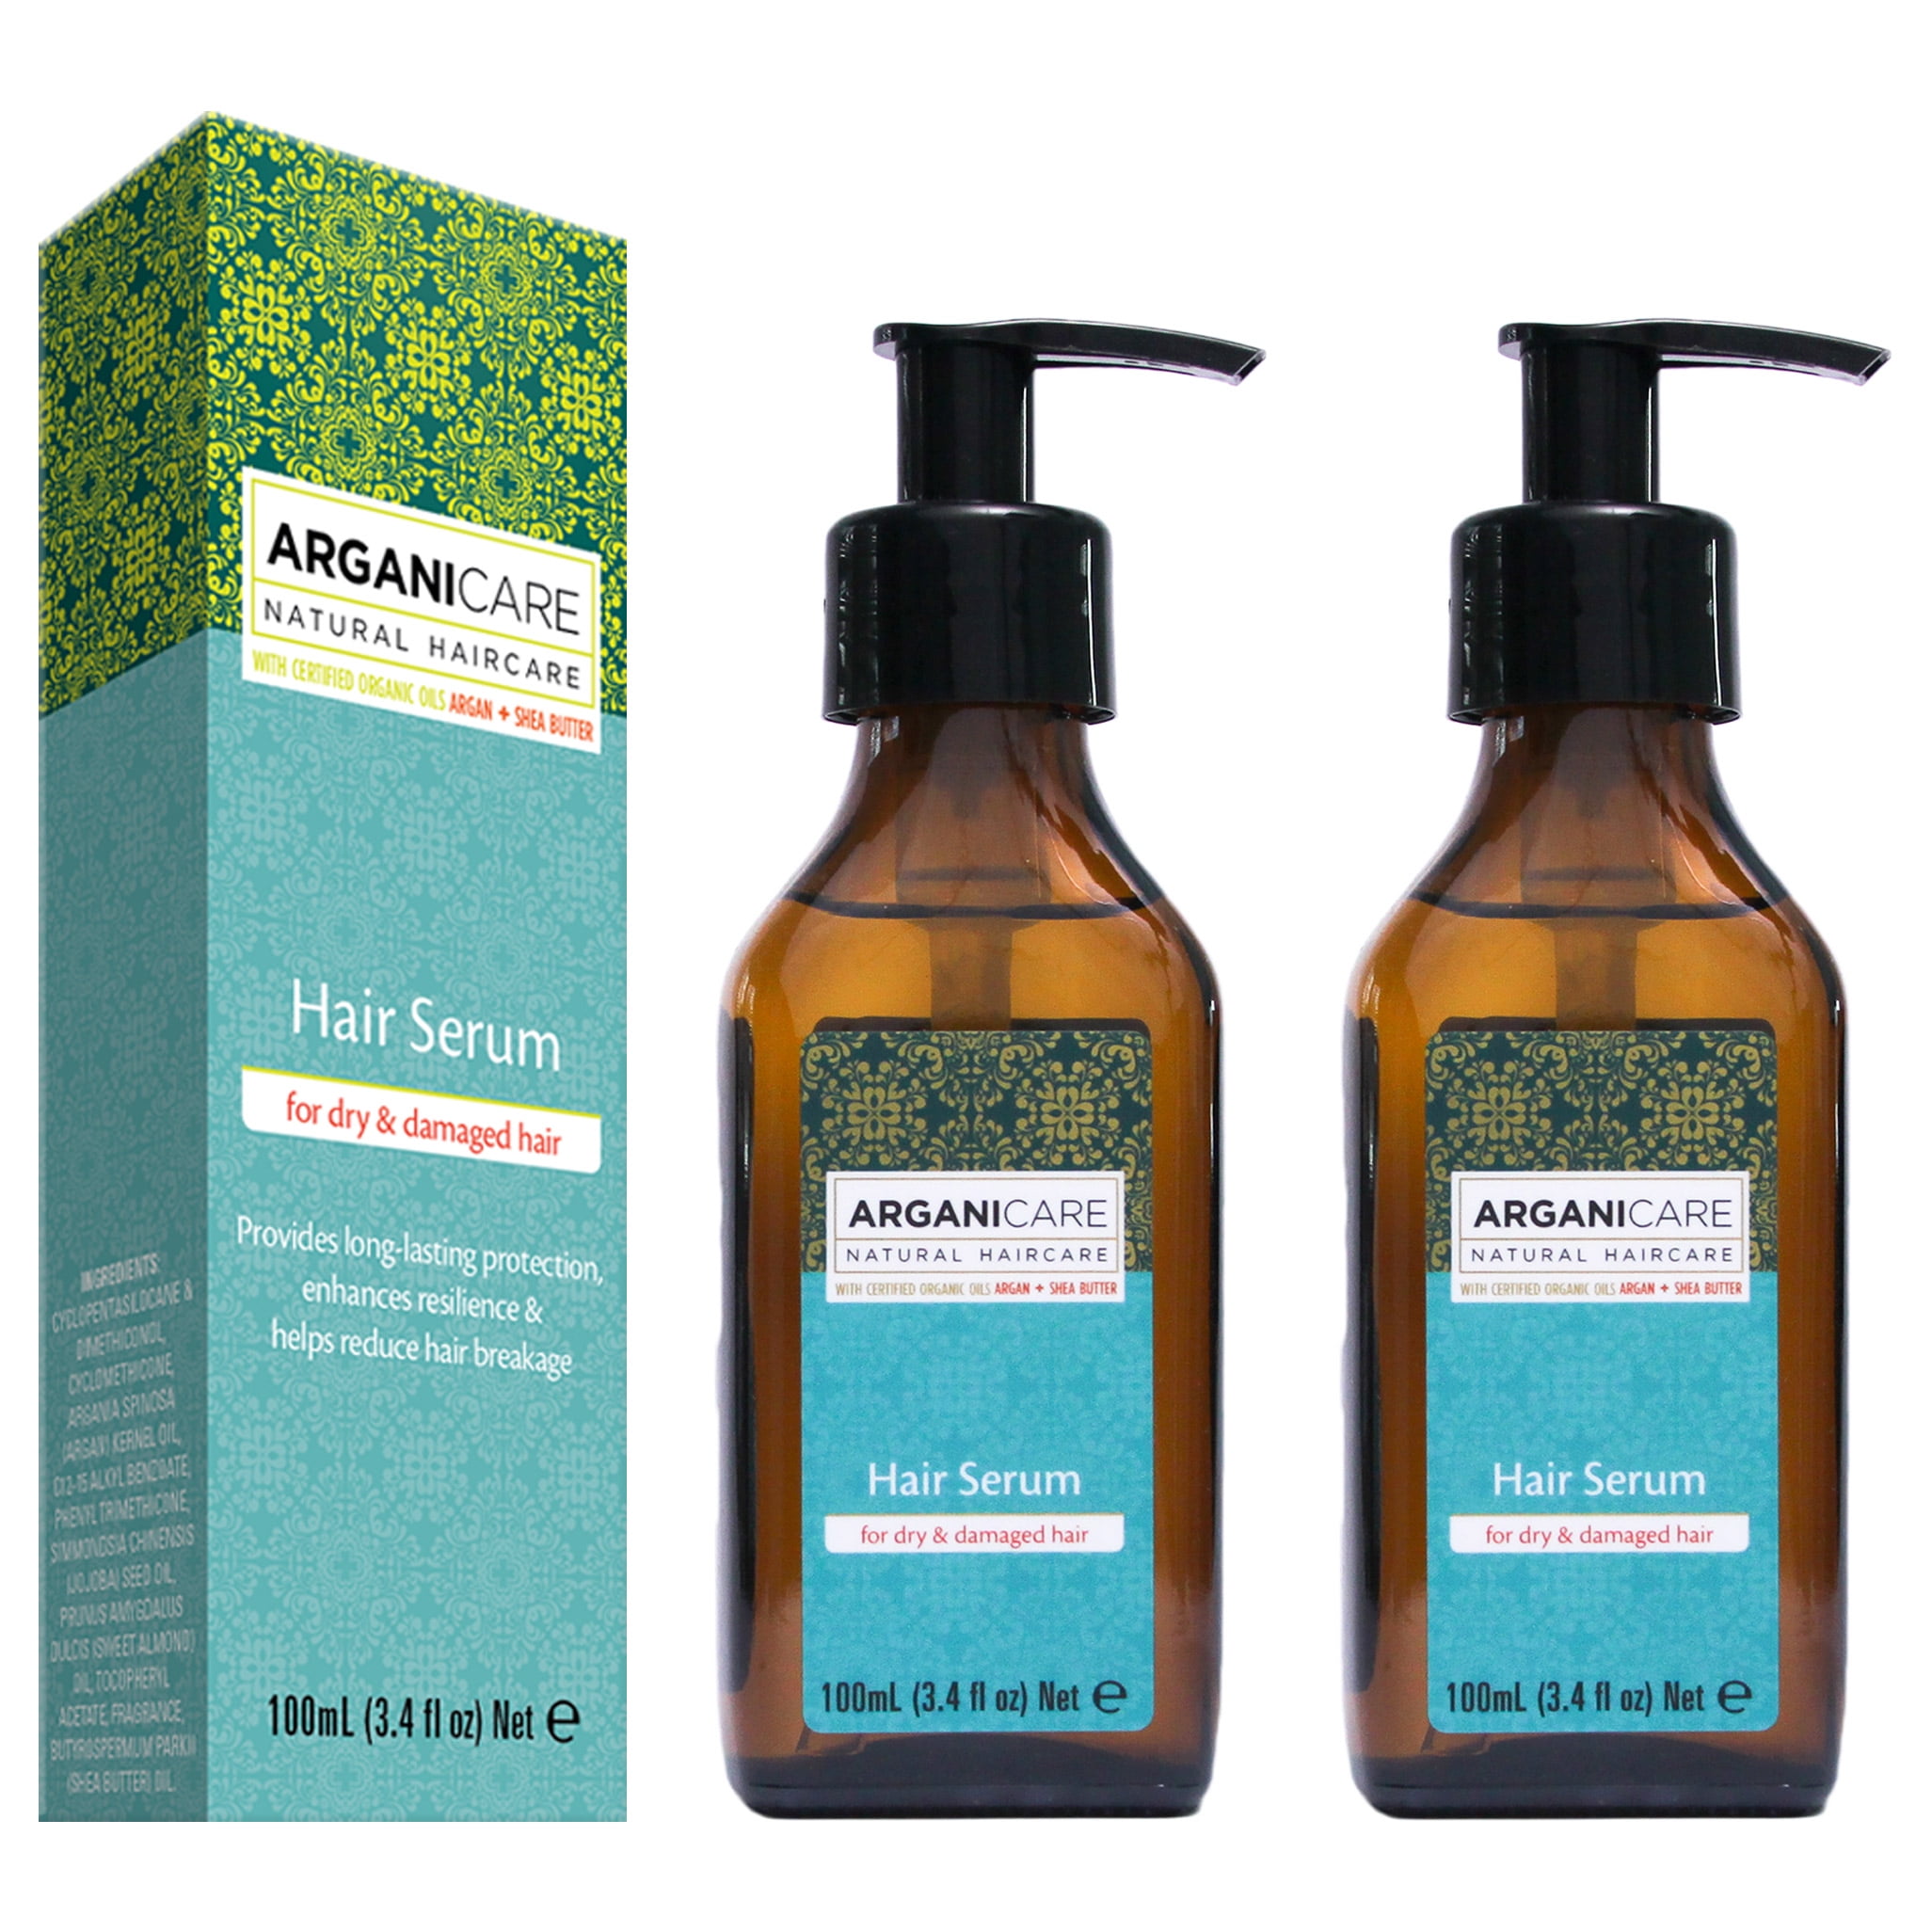 Arganicare Argan Oil Hair Serum for dry and damaged hair with Certified  Organic Argan Oil and Shea Butter.  fl. Oz. 2 Pack Bundle 